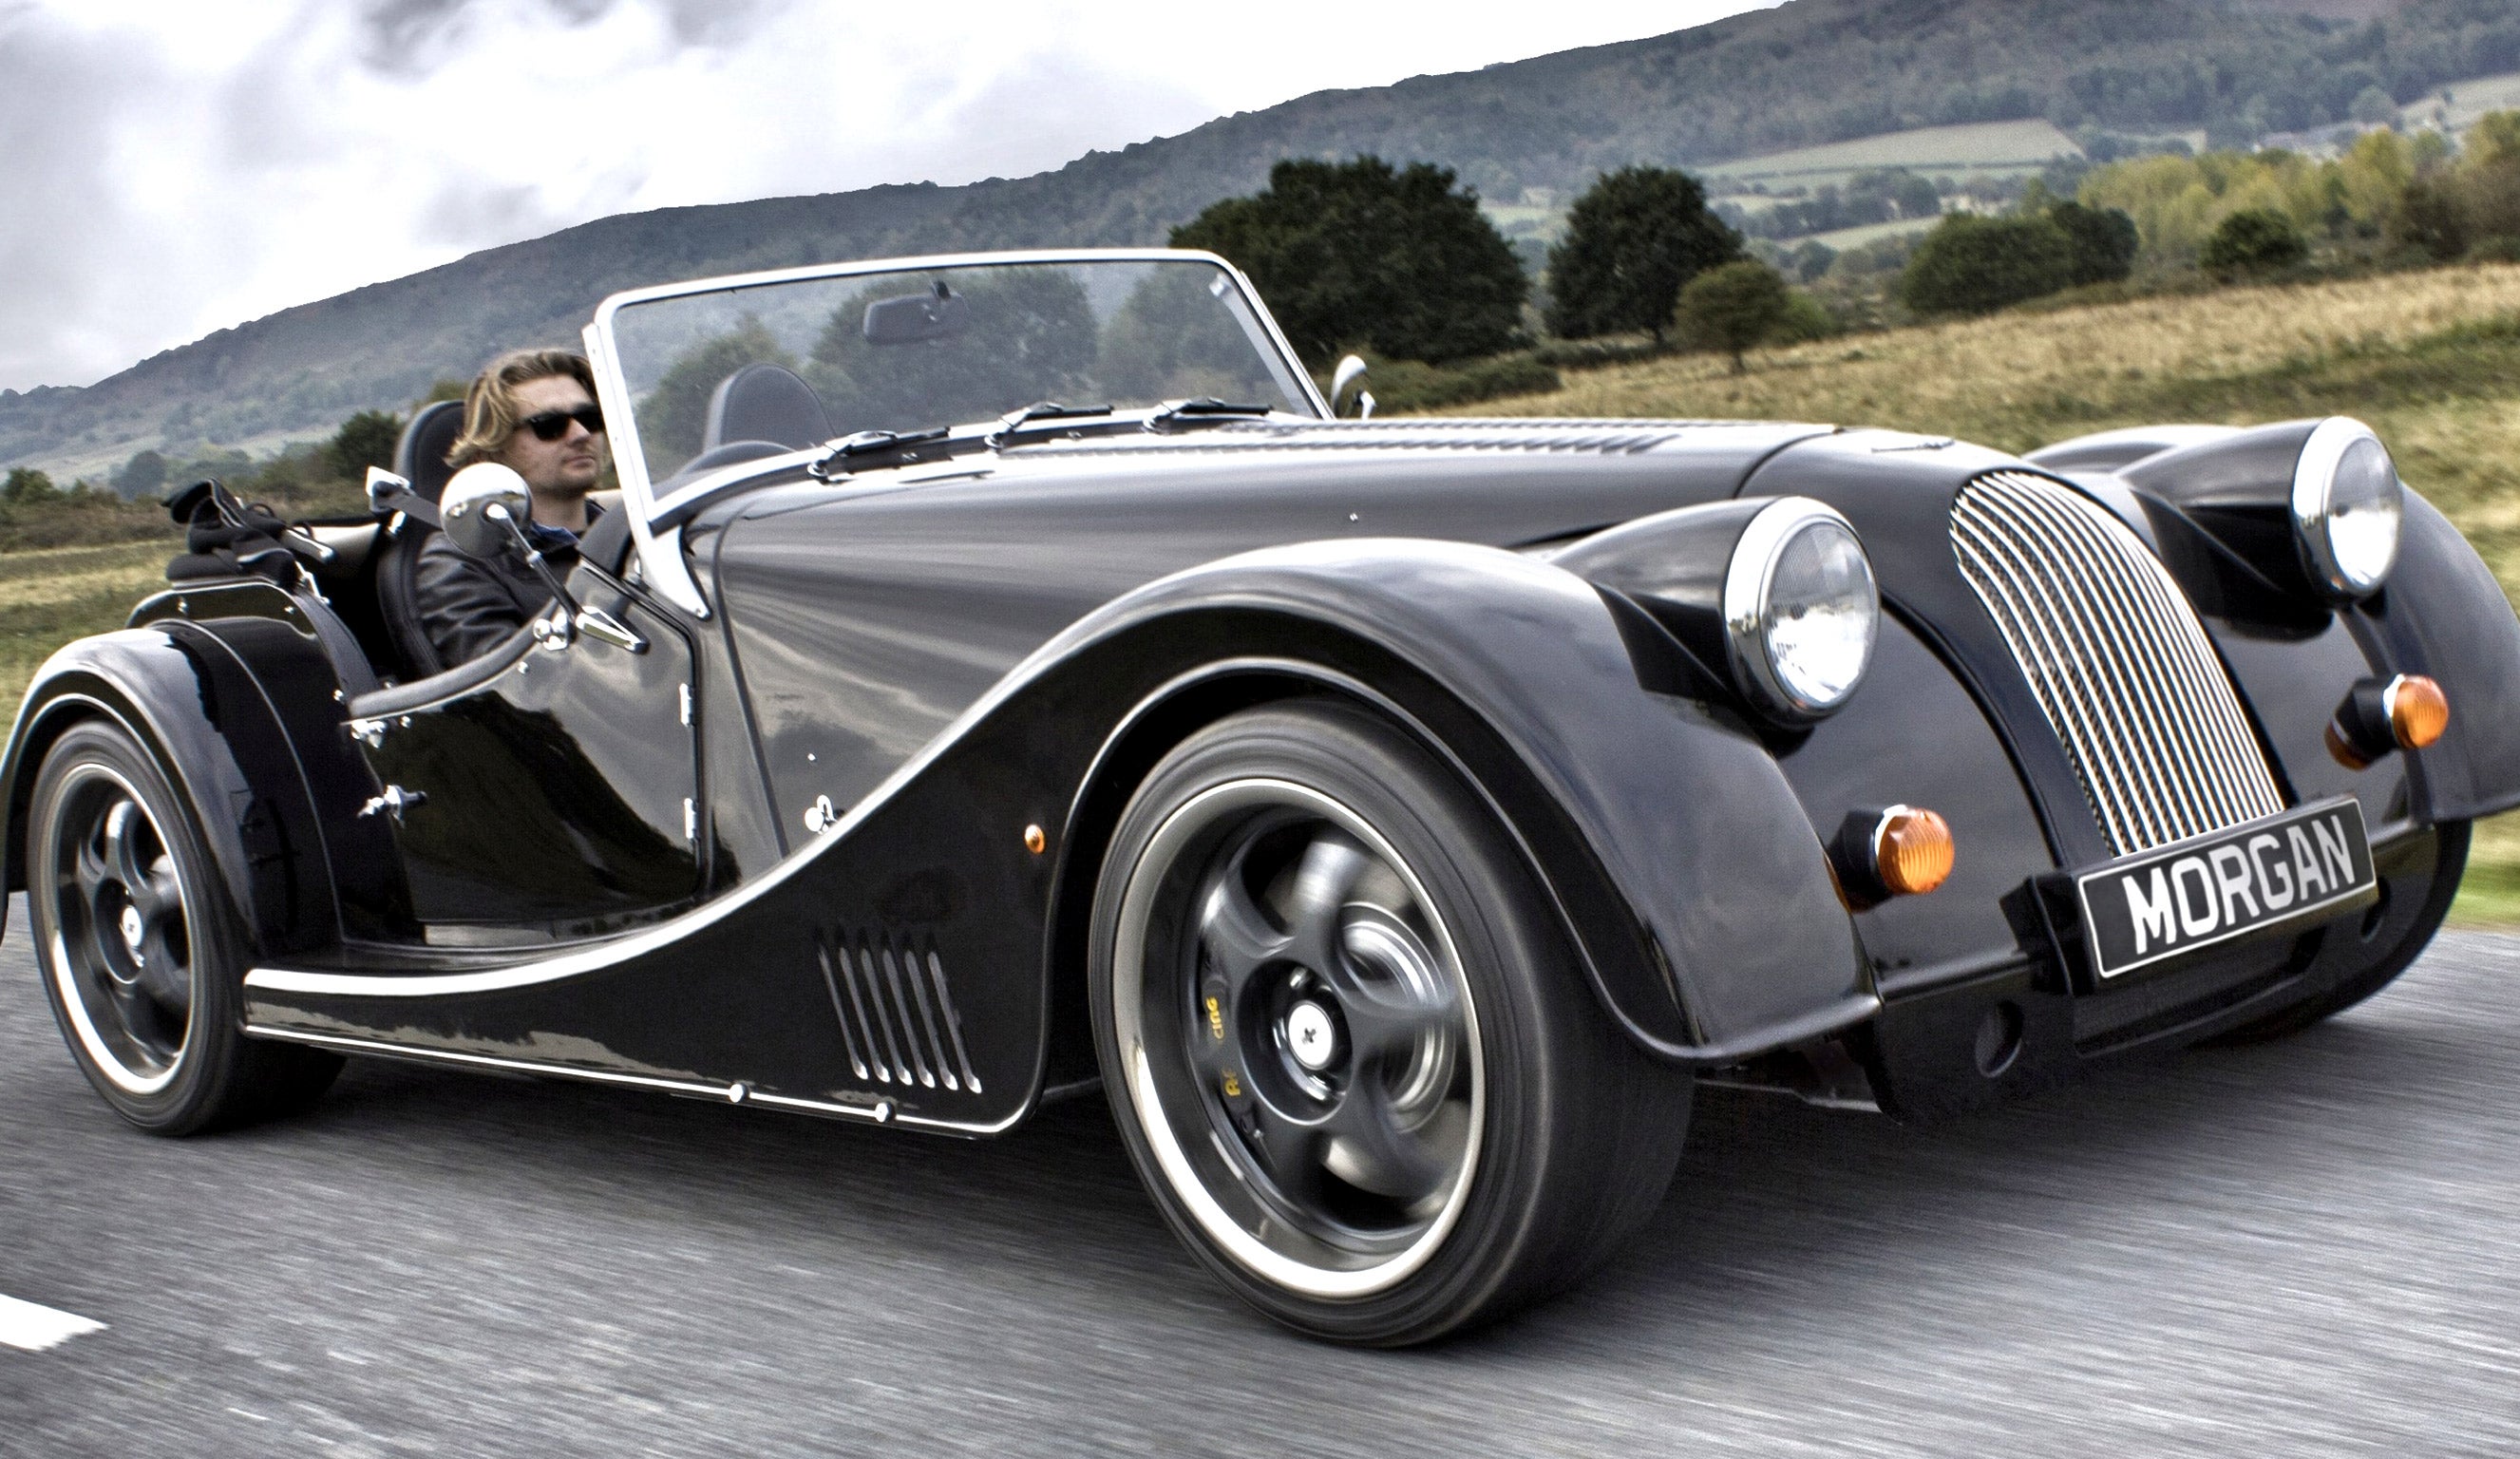 The Morgan Plus 8 is totally bonkers but still a magical thing